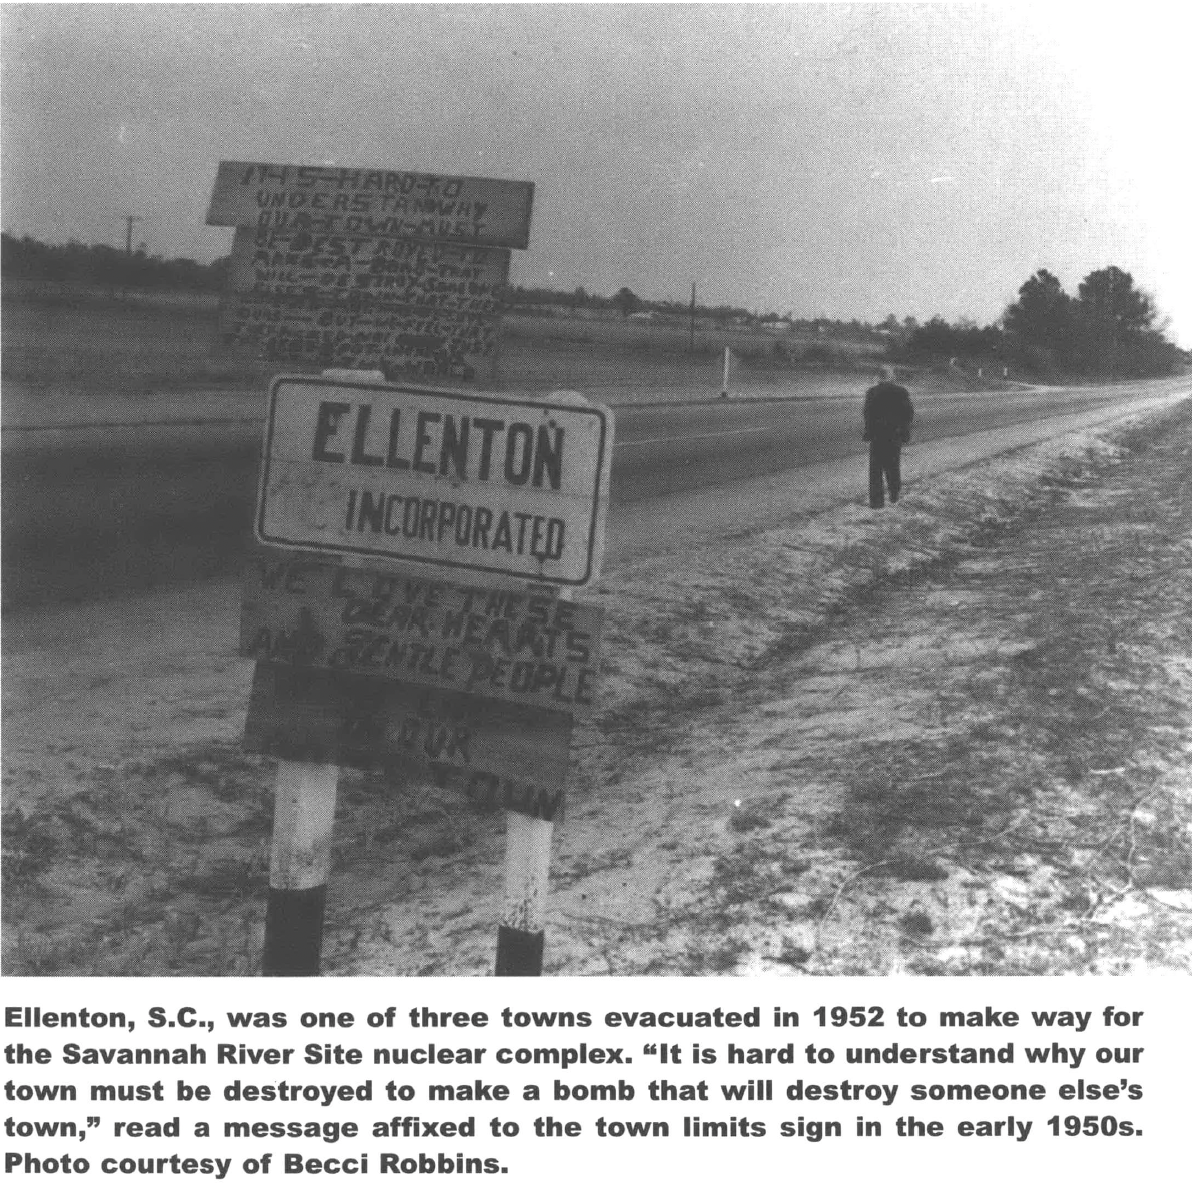 Ellenton, SC was one of those towns evacuated in 1952 to make way for the Savannah River Site nuclear complex.